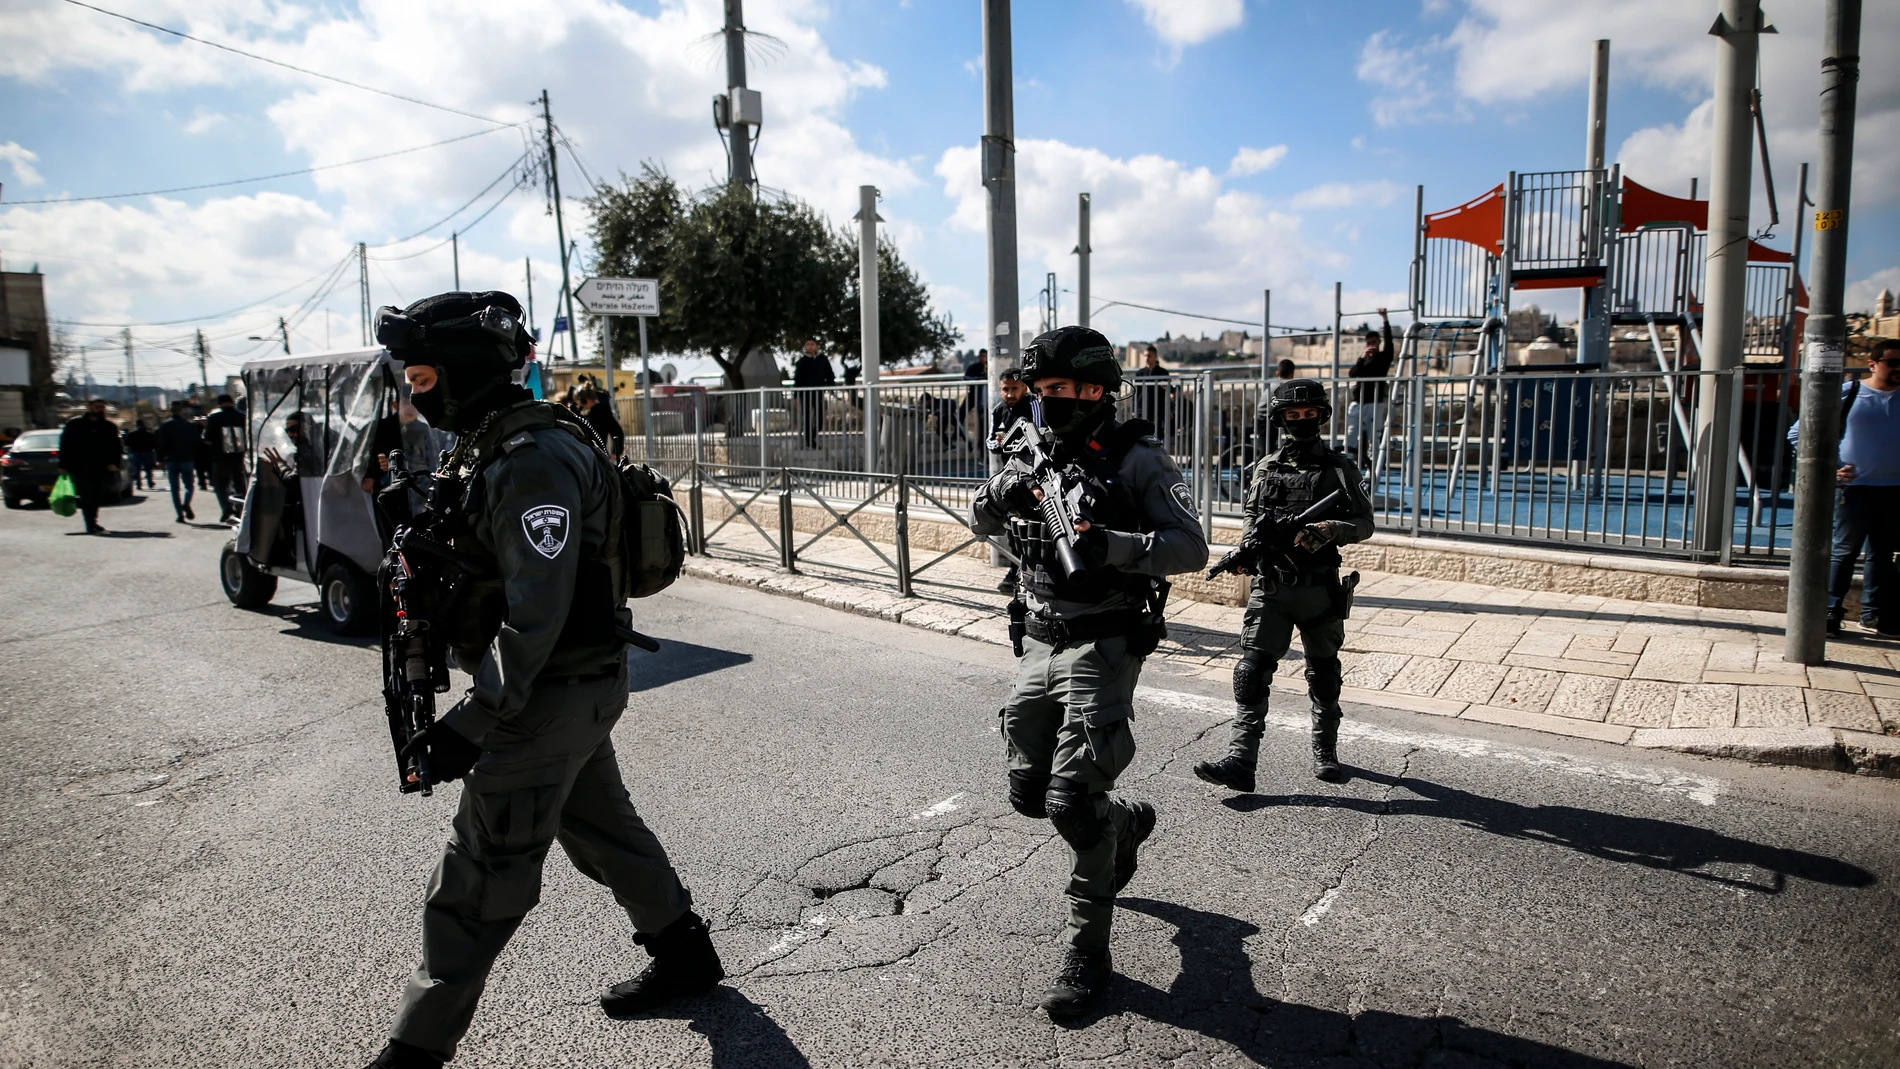 February 9, 2024, Jerusalem, Israel: Members of the Israeli security forces seen walking on the street amid the the Friday noon prayer in the east Jerusalem neighbourhood of Ras al-Amud as age restrictions have been imposed to access the Al-Aqsa Mosque compound, amid the ongoing battles between Israel and the Palestinian group Hamas. Israeli forces take security measures as the Palestinians perform Friday prayers on a street at Ras Al-Amud neighborhood in Jerusalem. (Foto de ARCHIVO) 09/0...